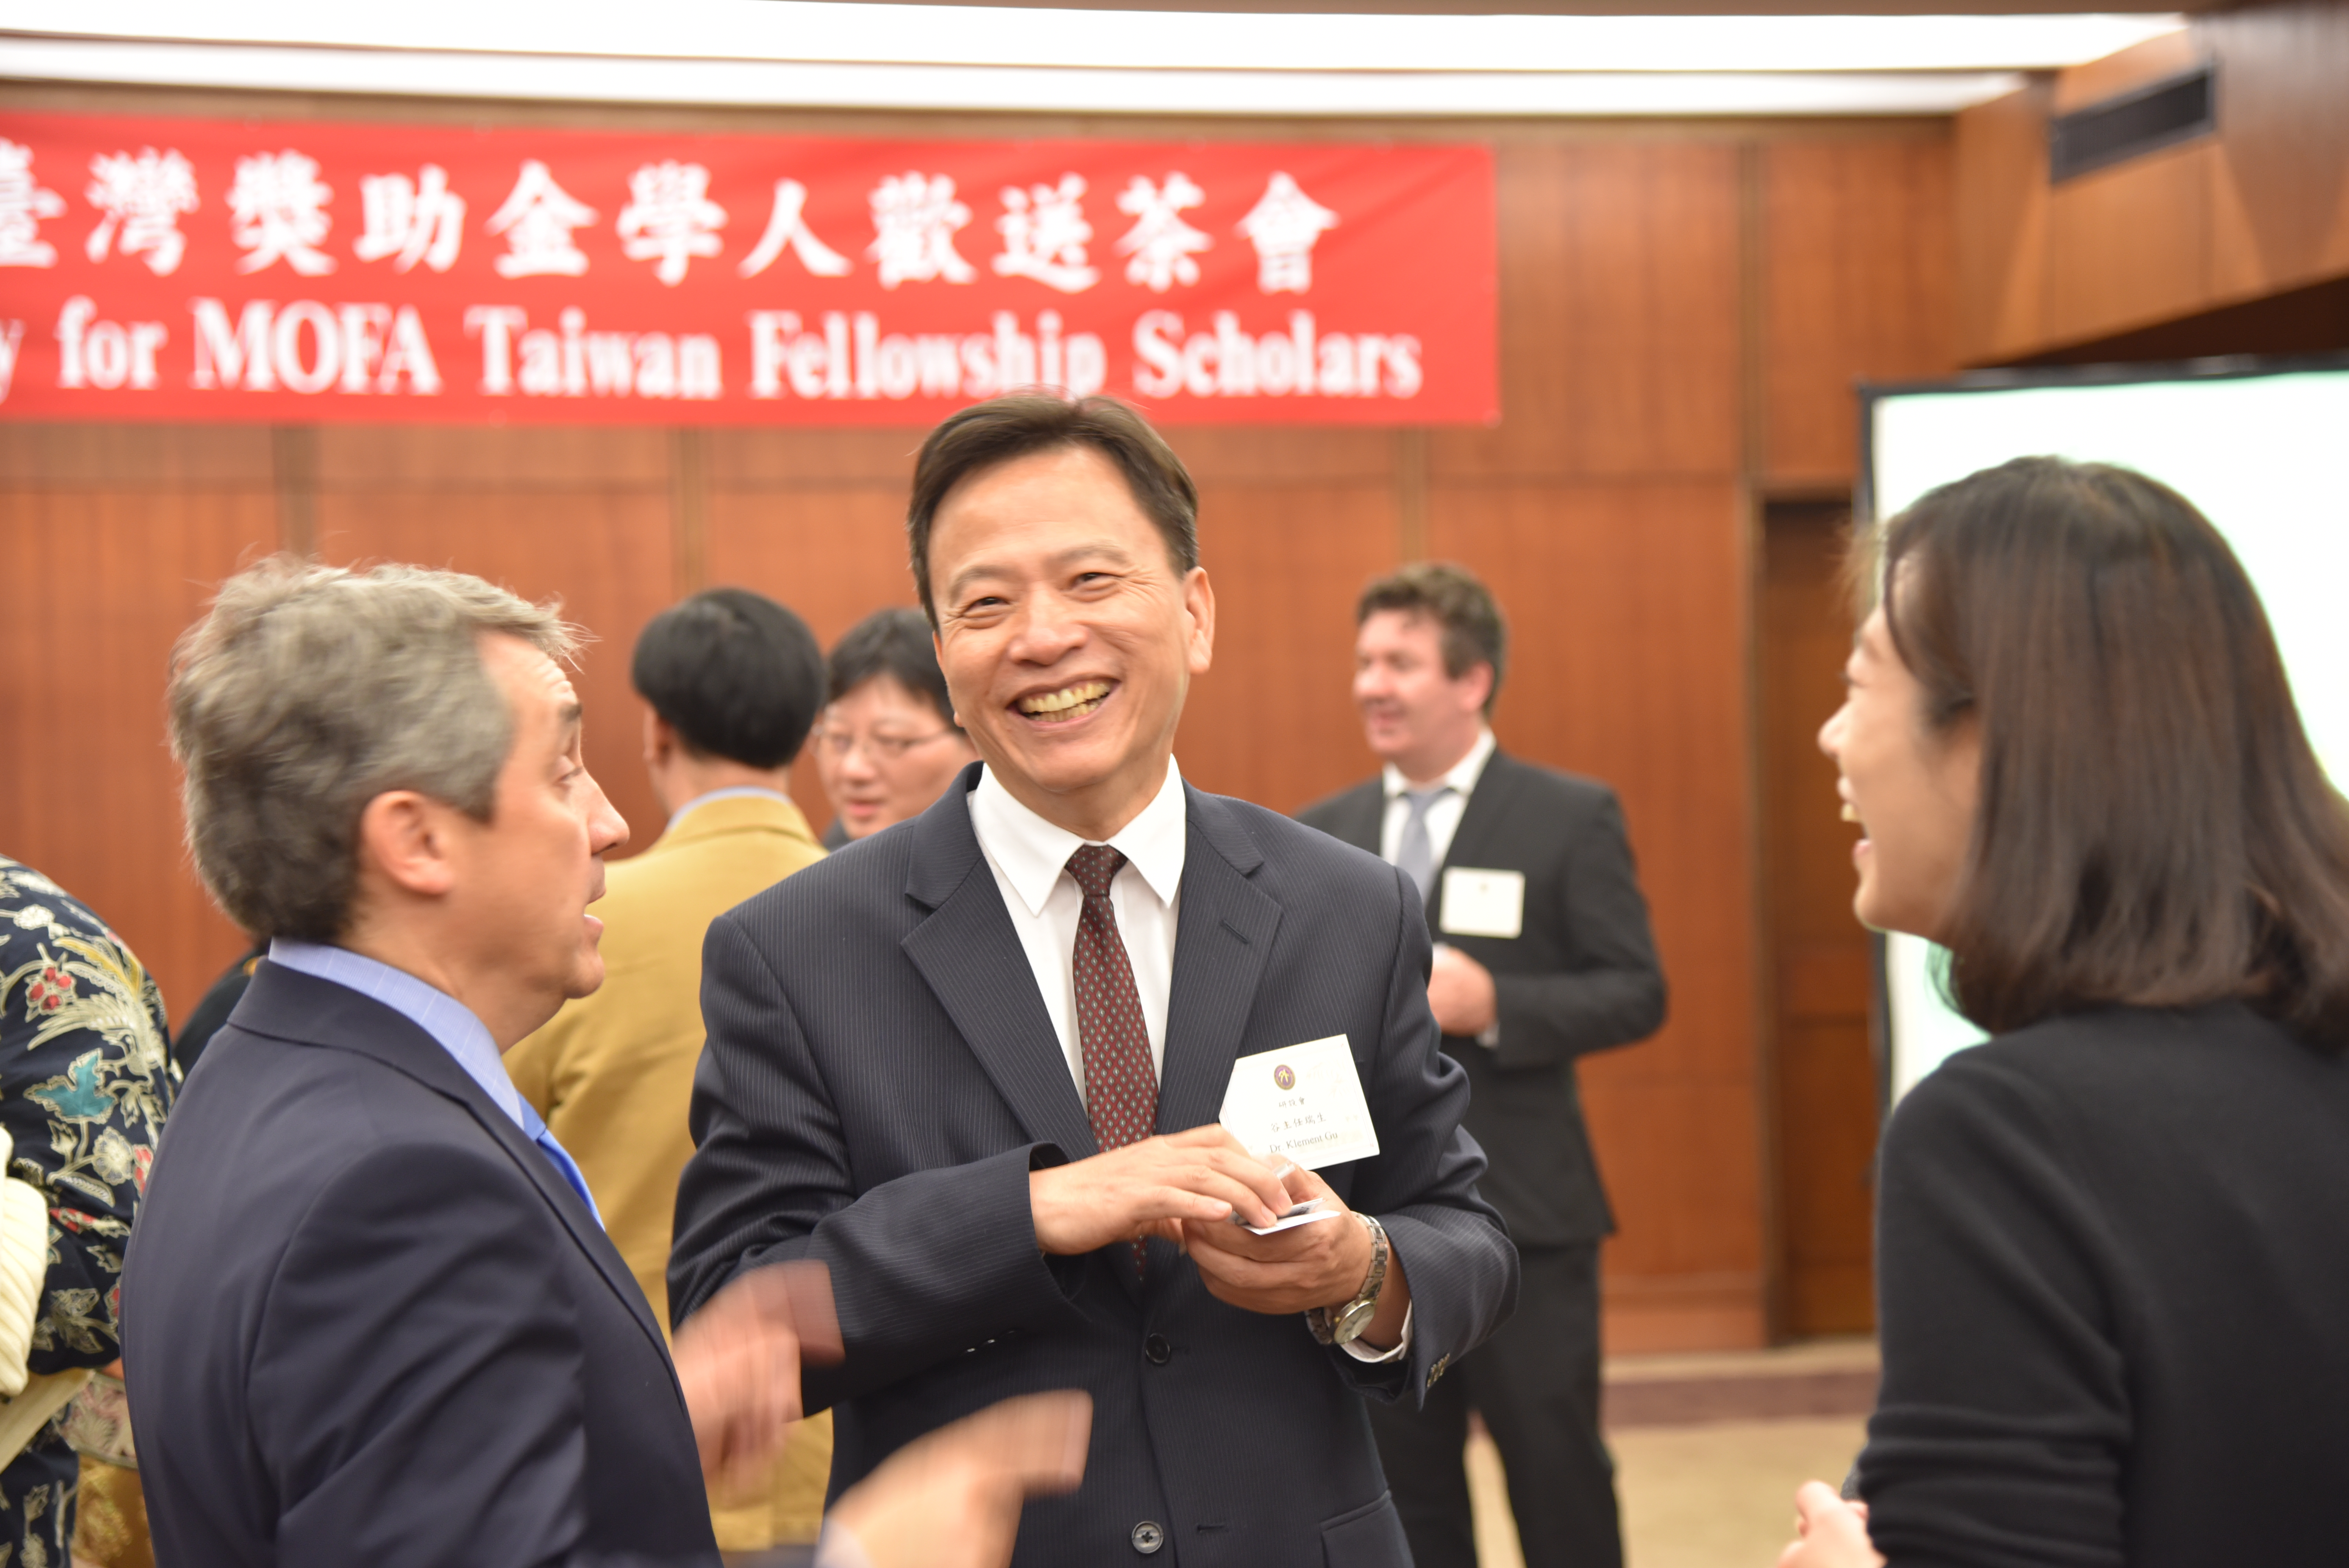 2018 Farewell Party for MOFA Taiwan Fellowship Scholars:picture10